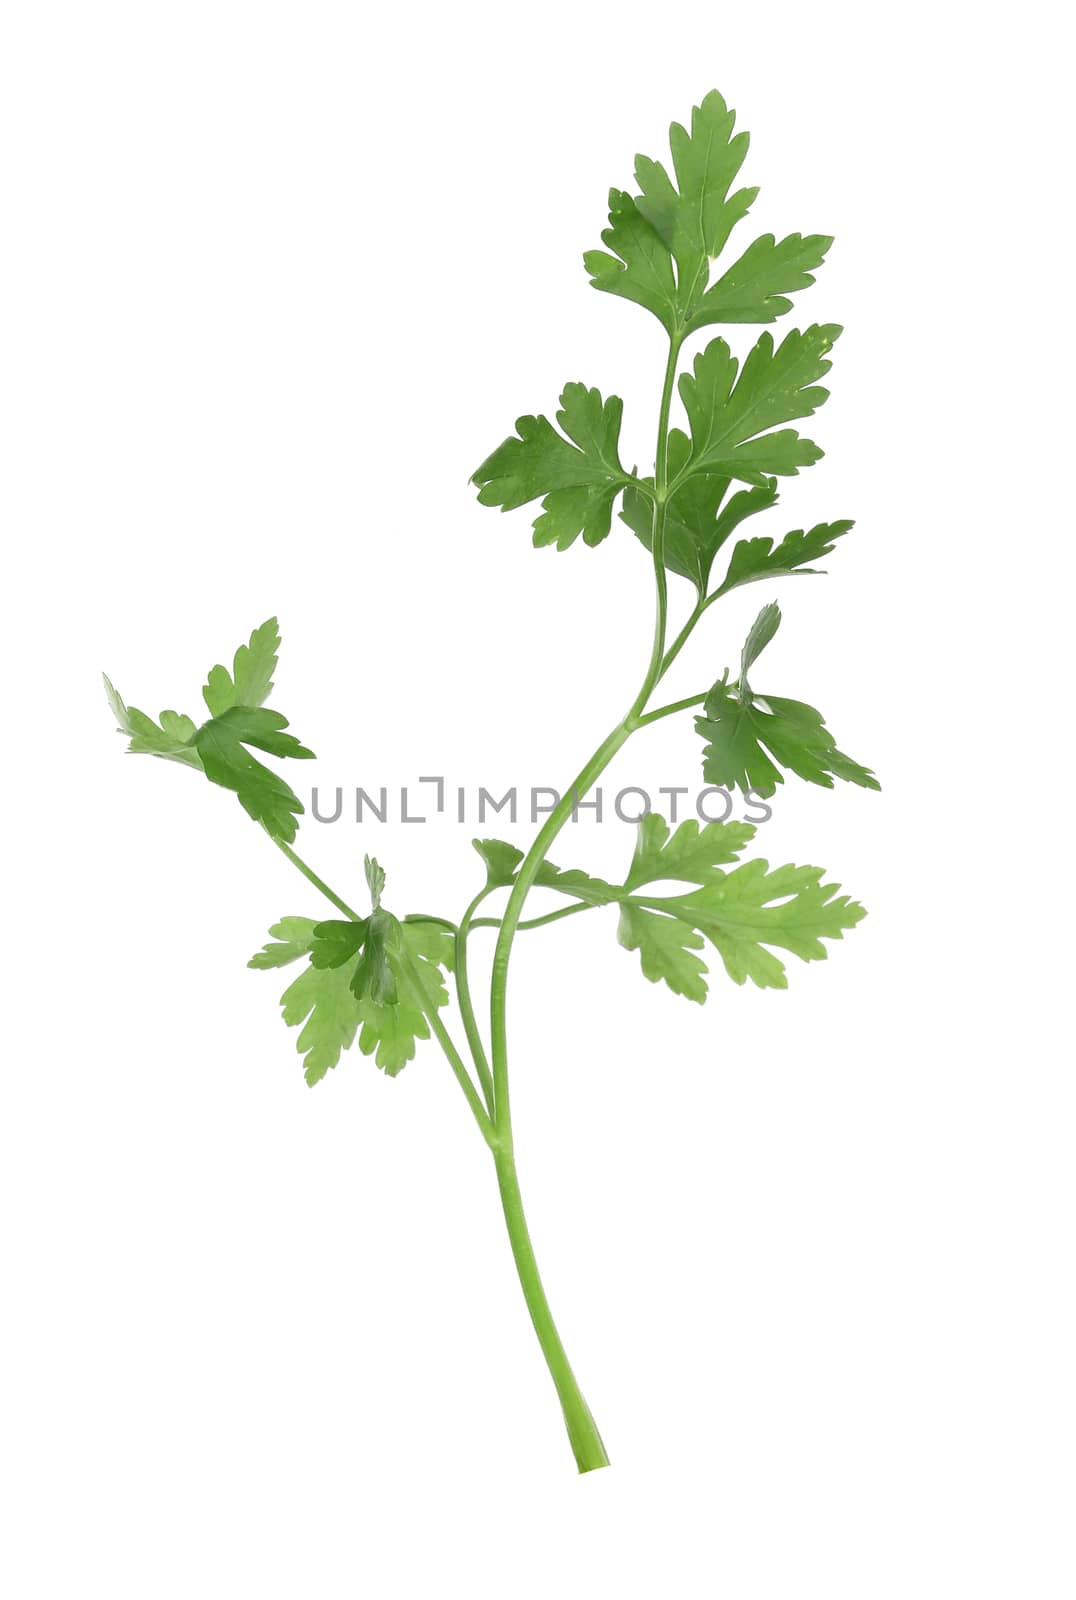 Parsley on a white background. Isolated on a white background.